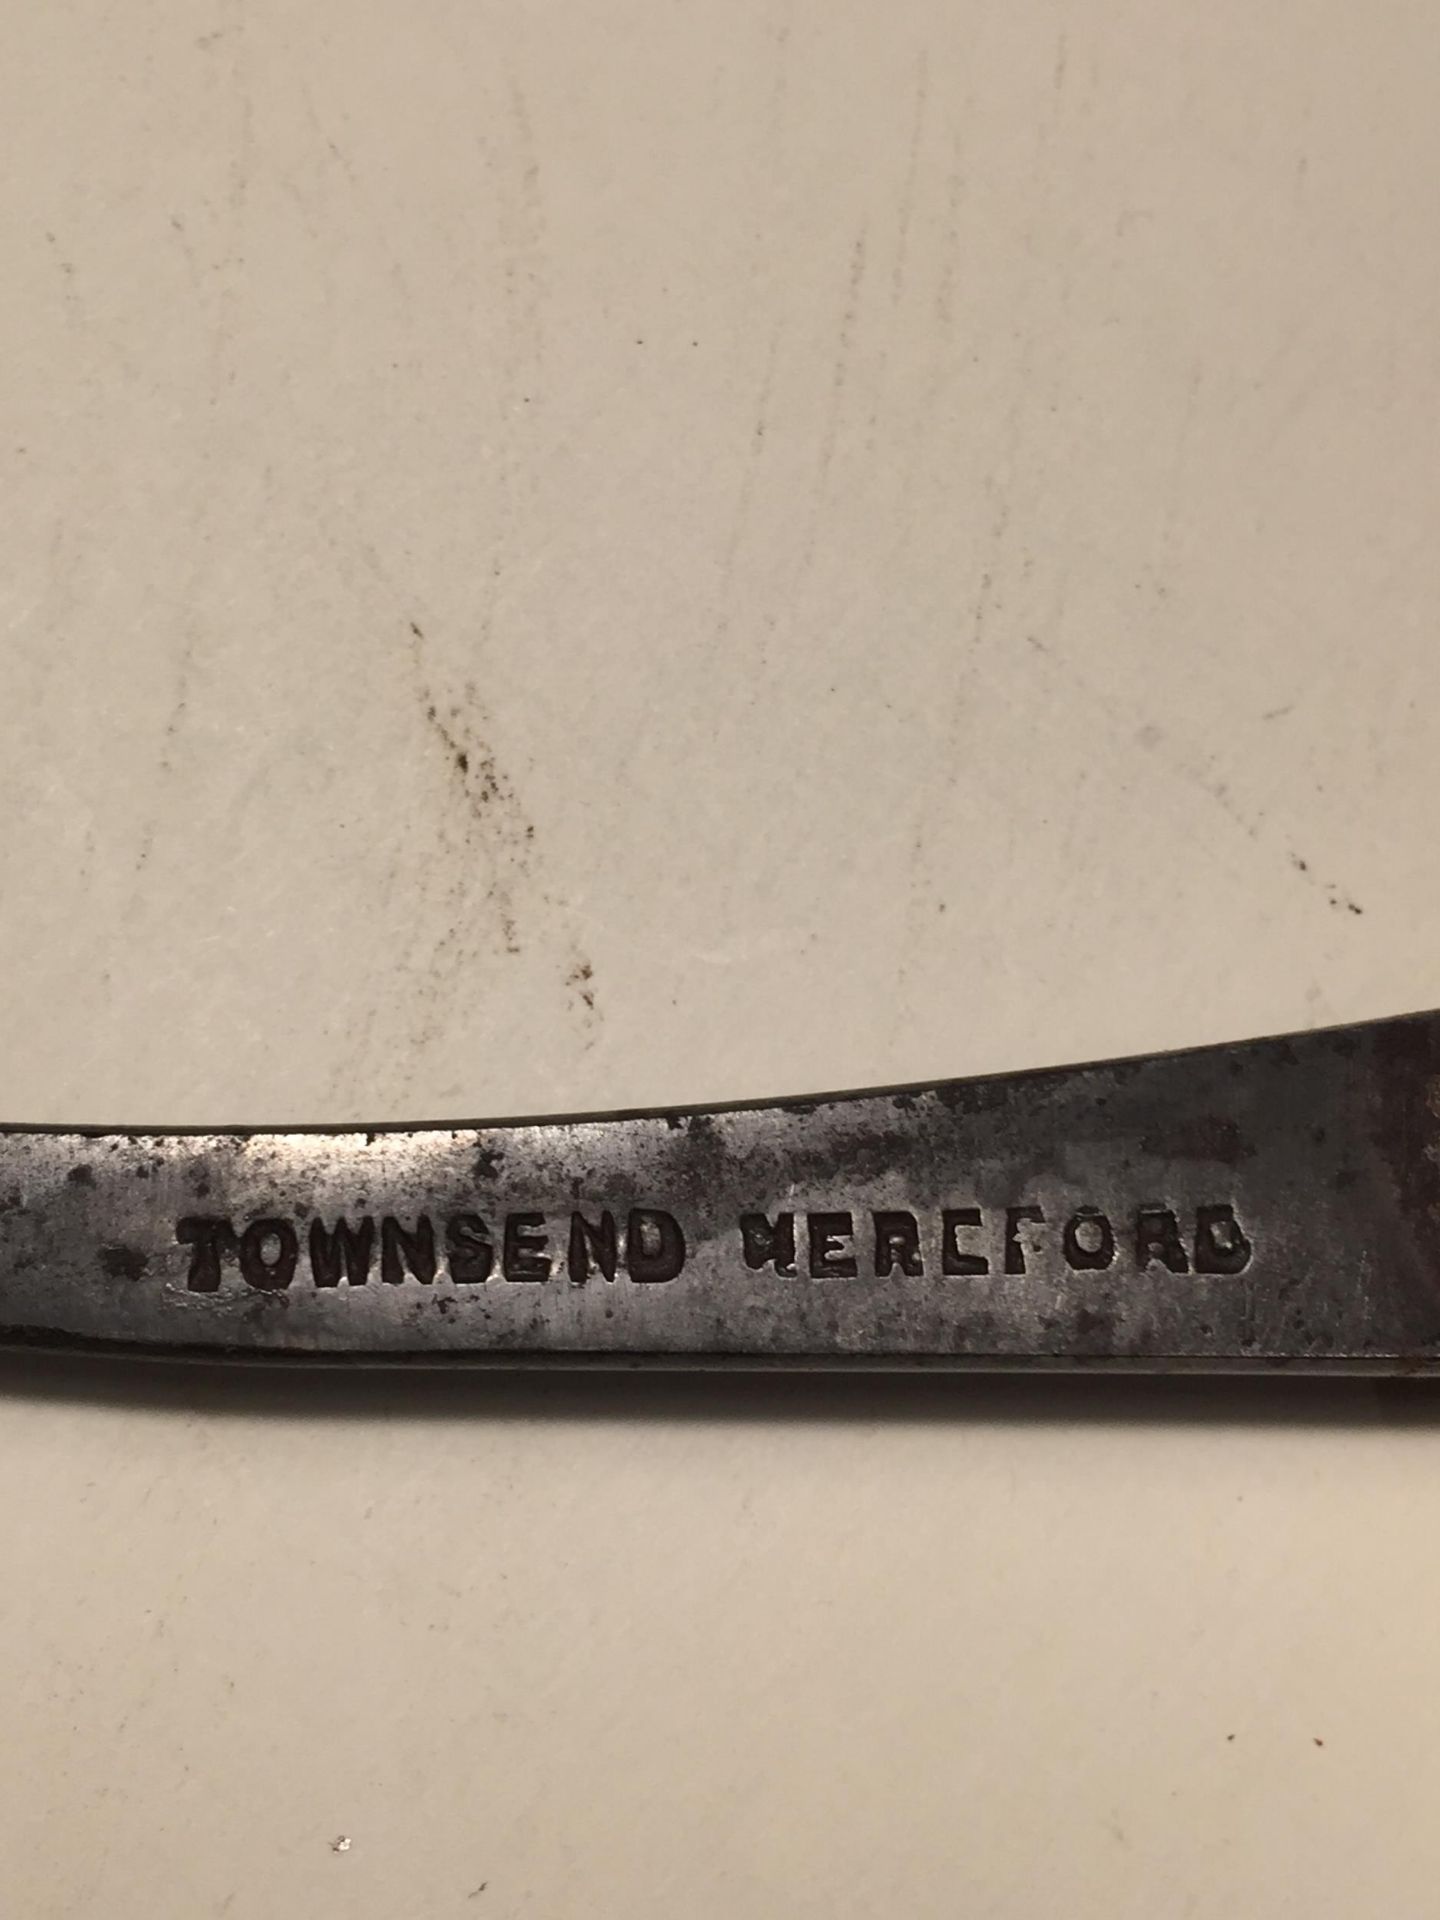 A TOWNSEND HEREFORD BLACKSMITHS TOOL - Image 2 of 2